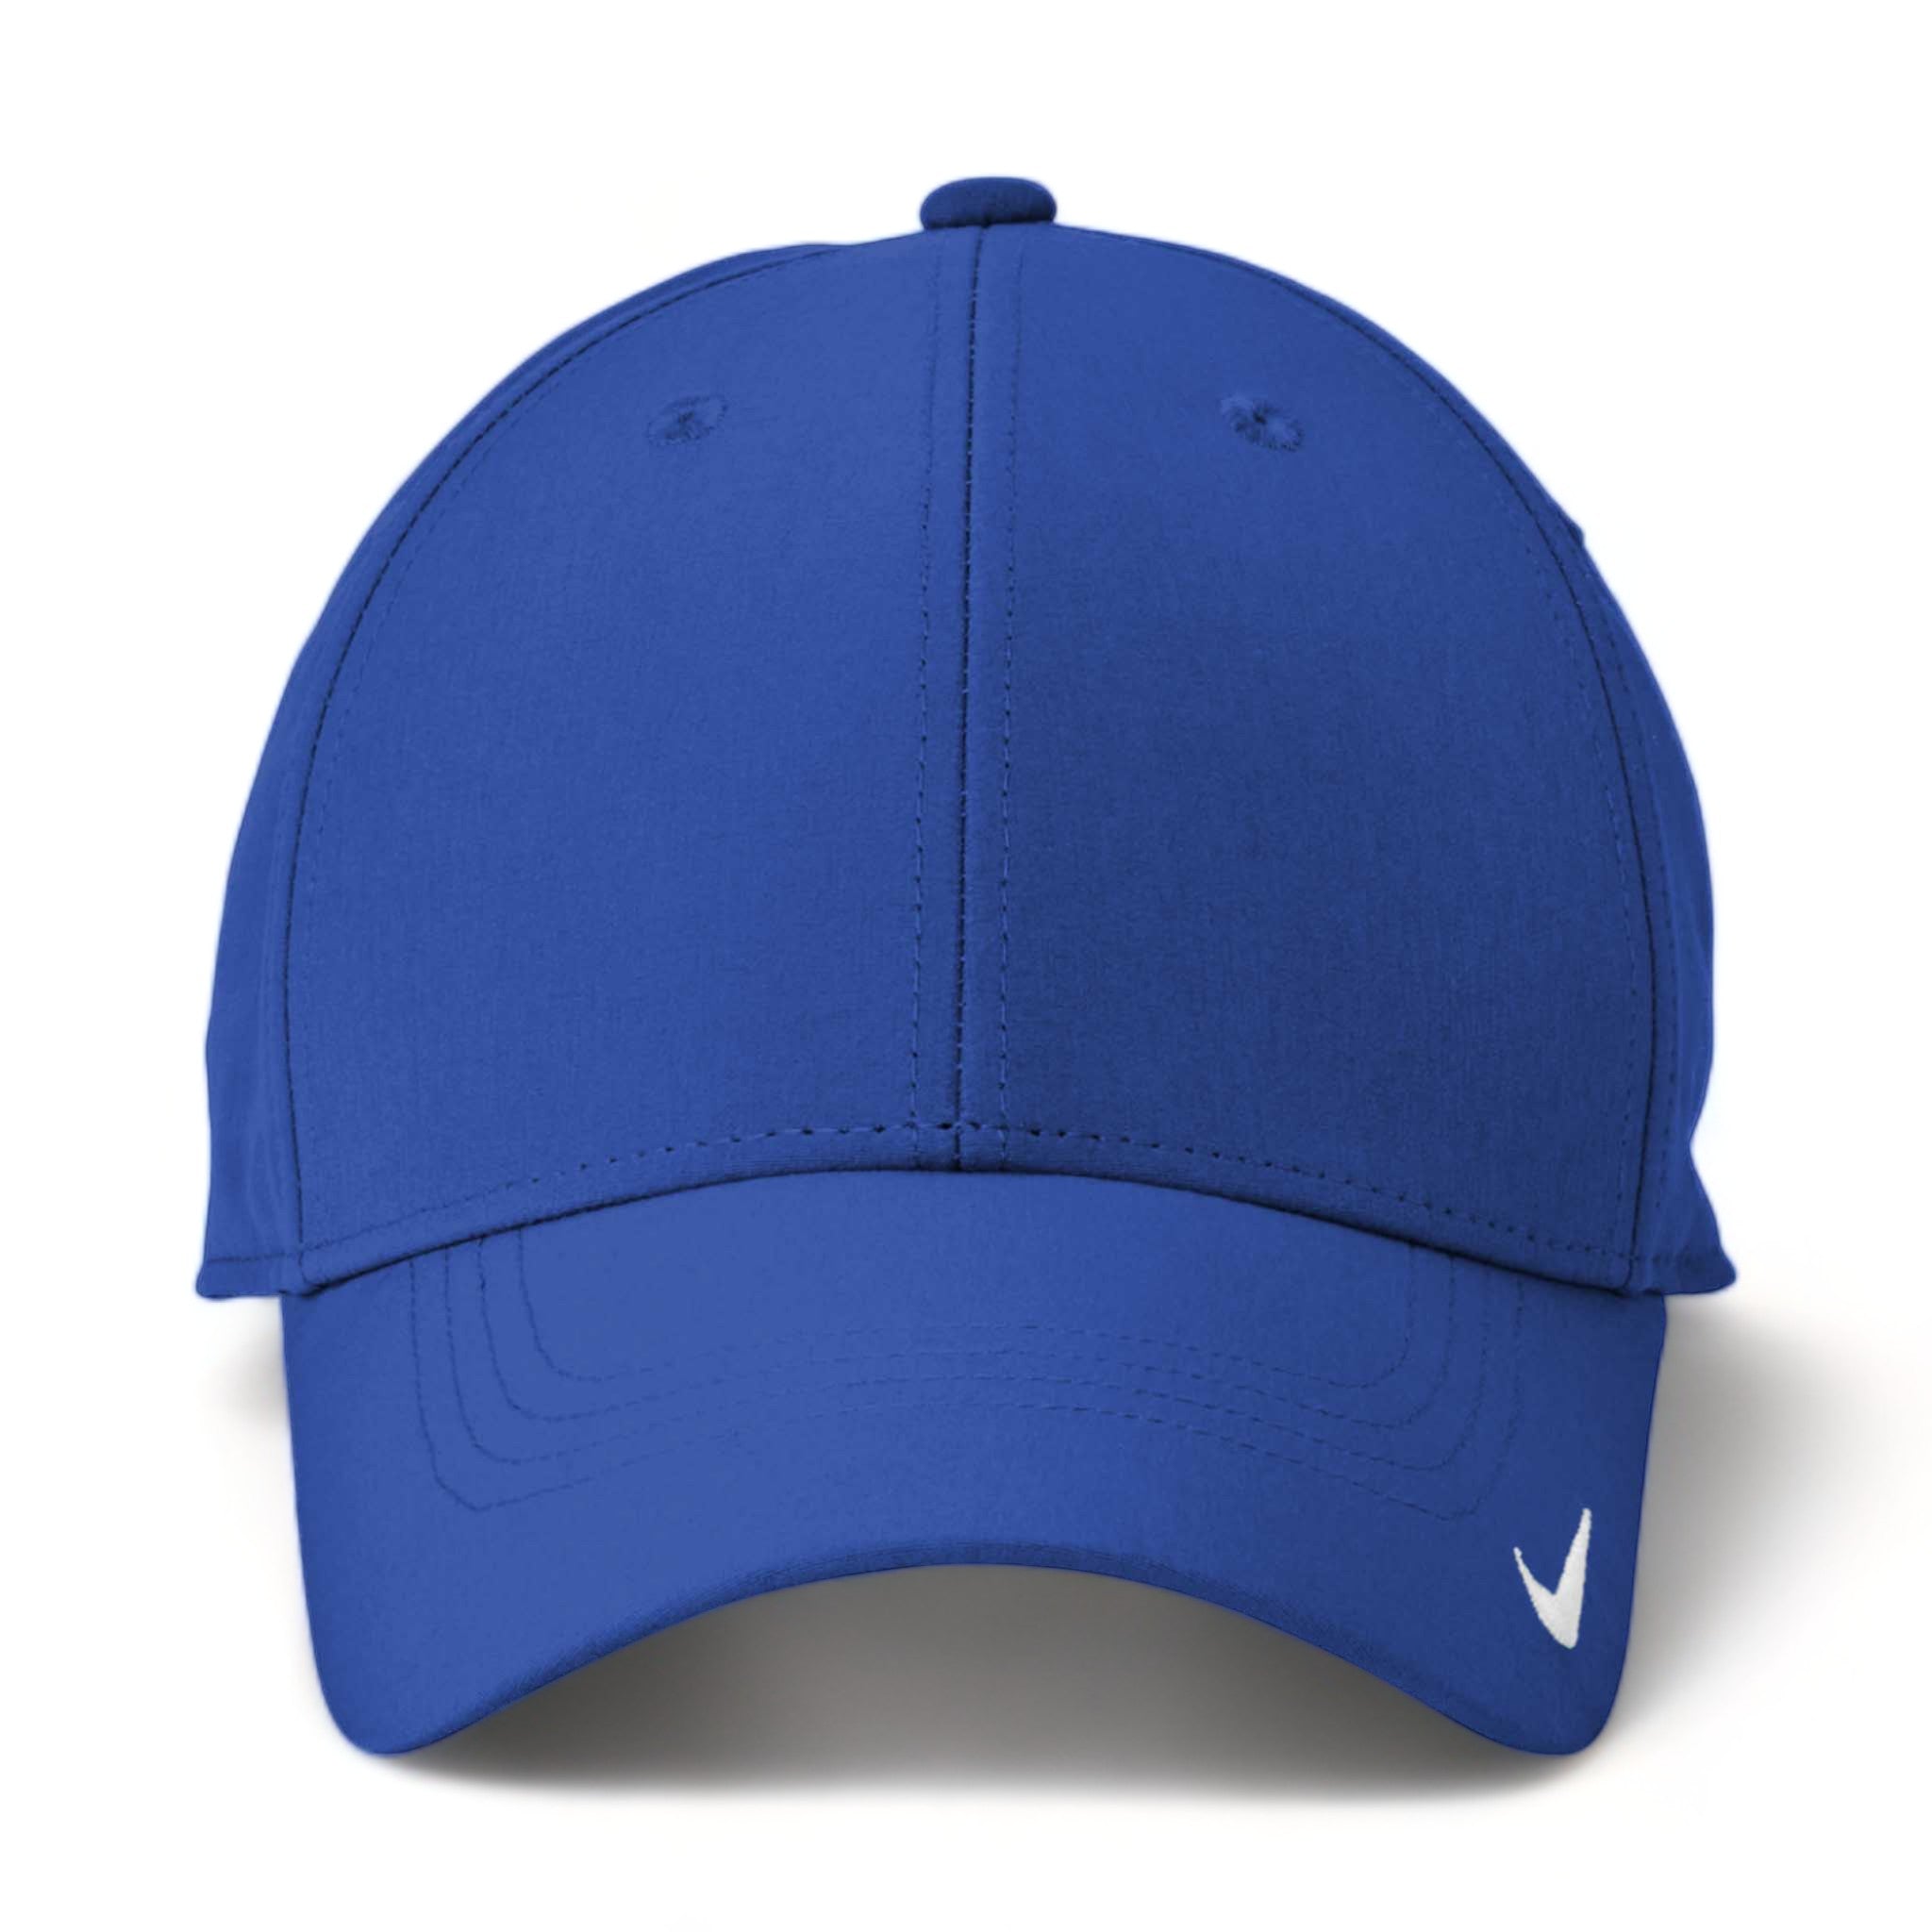 Front view of Nike NKFB6447 custom hat in game royal